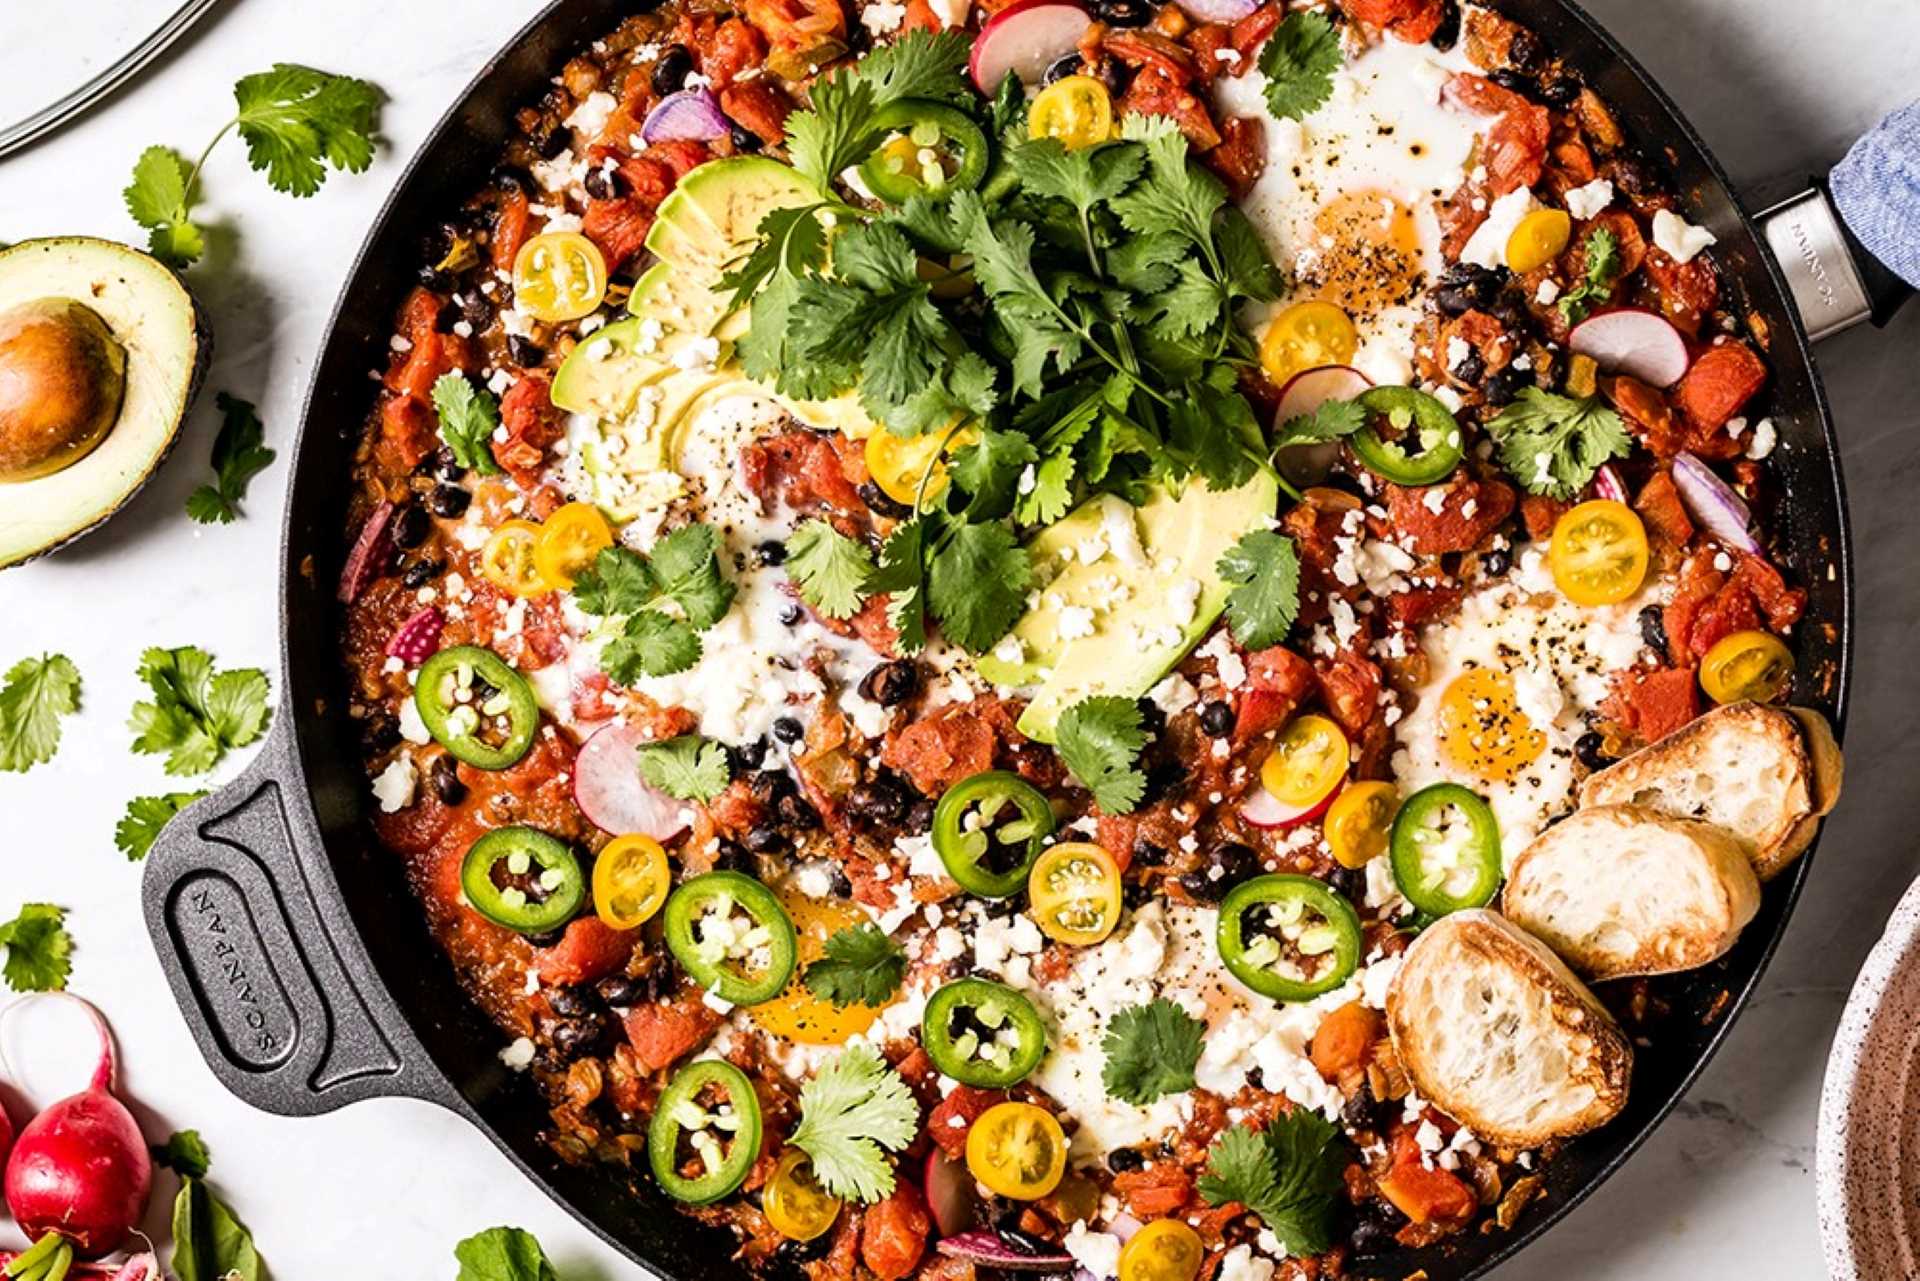 9 Surprising Things You Can Make In A Nonstick Skillet